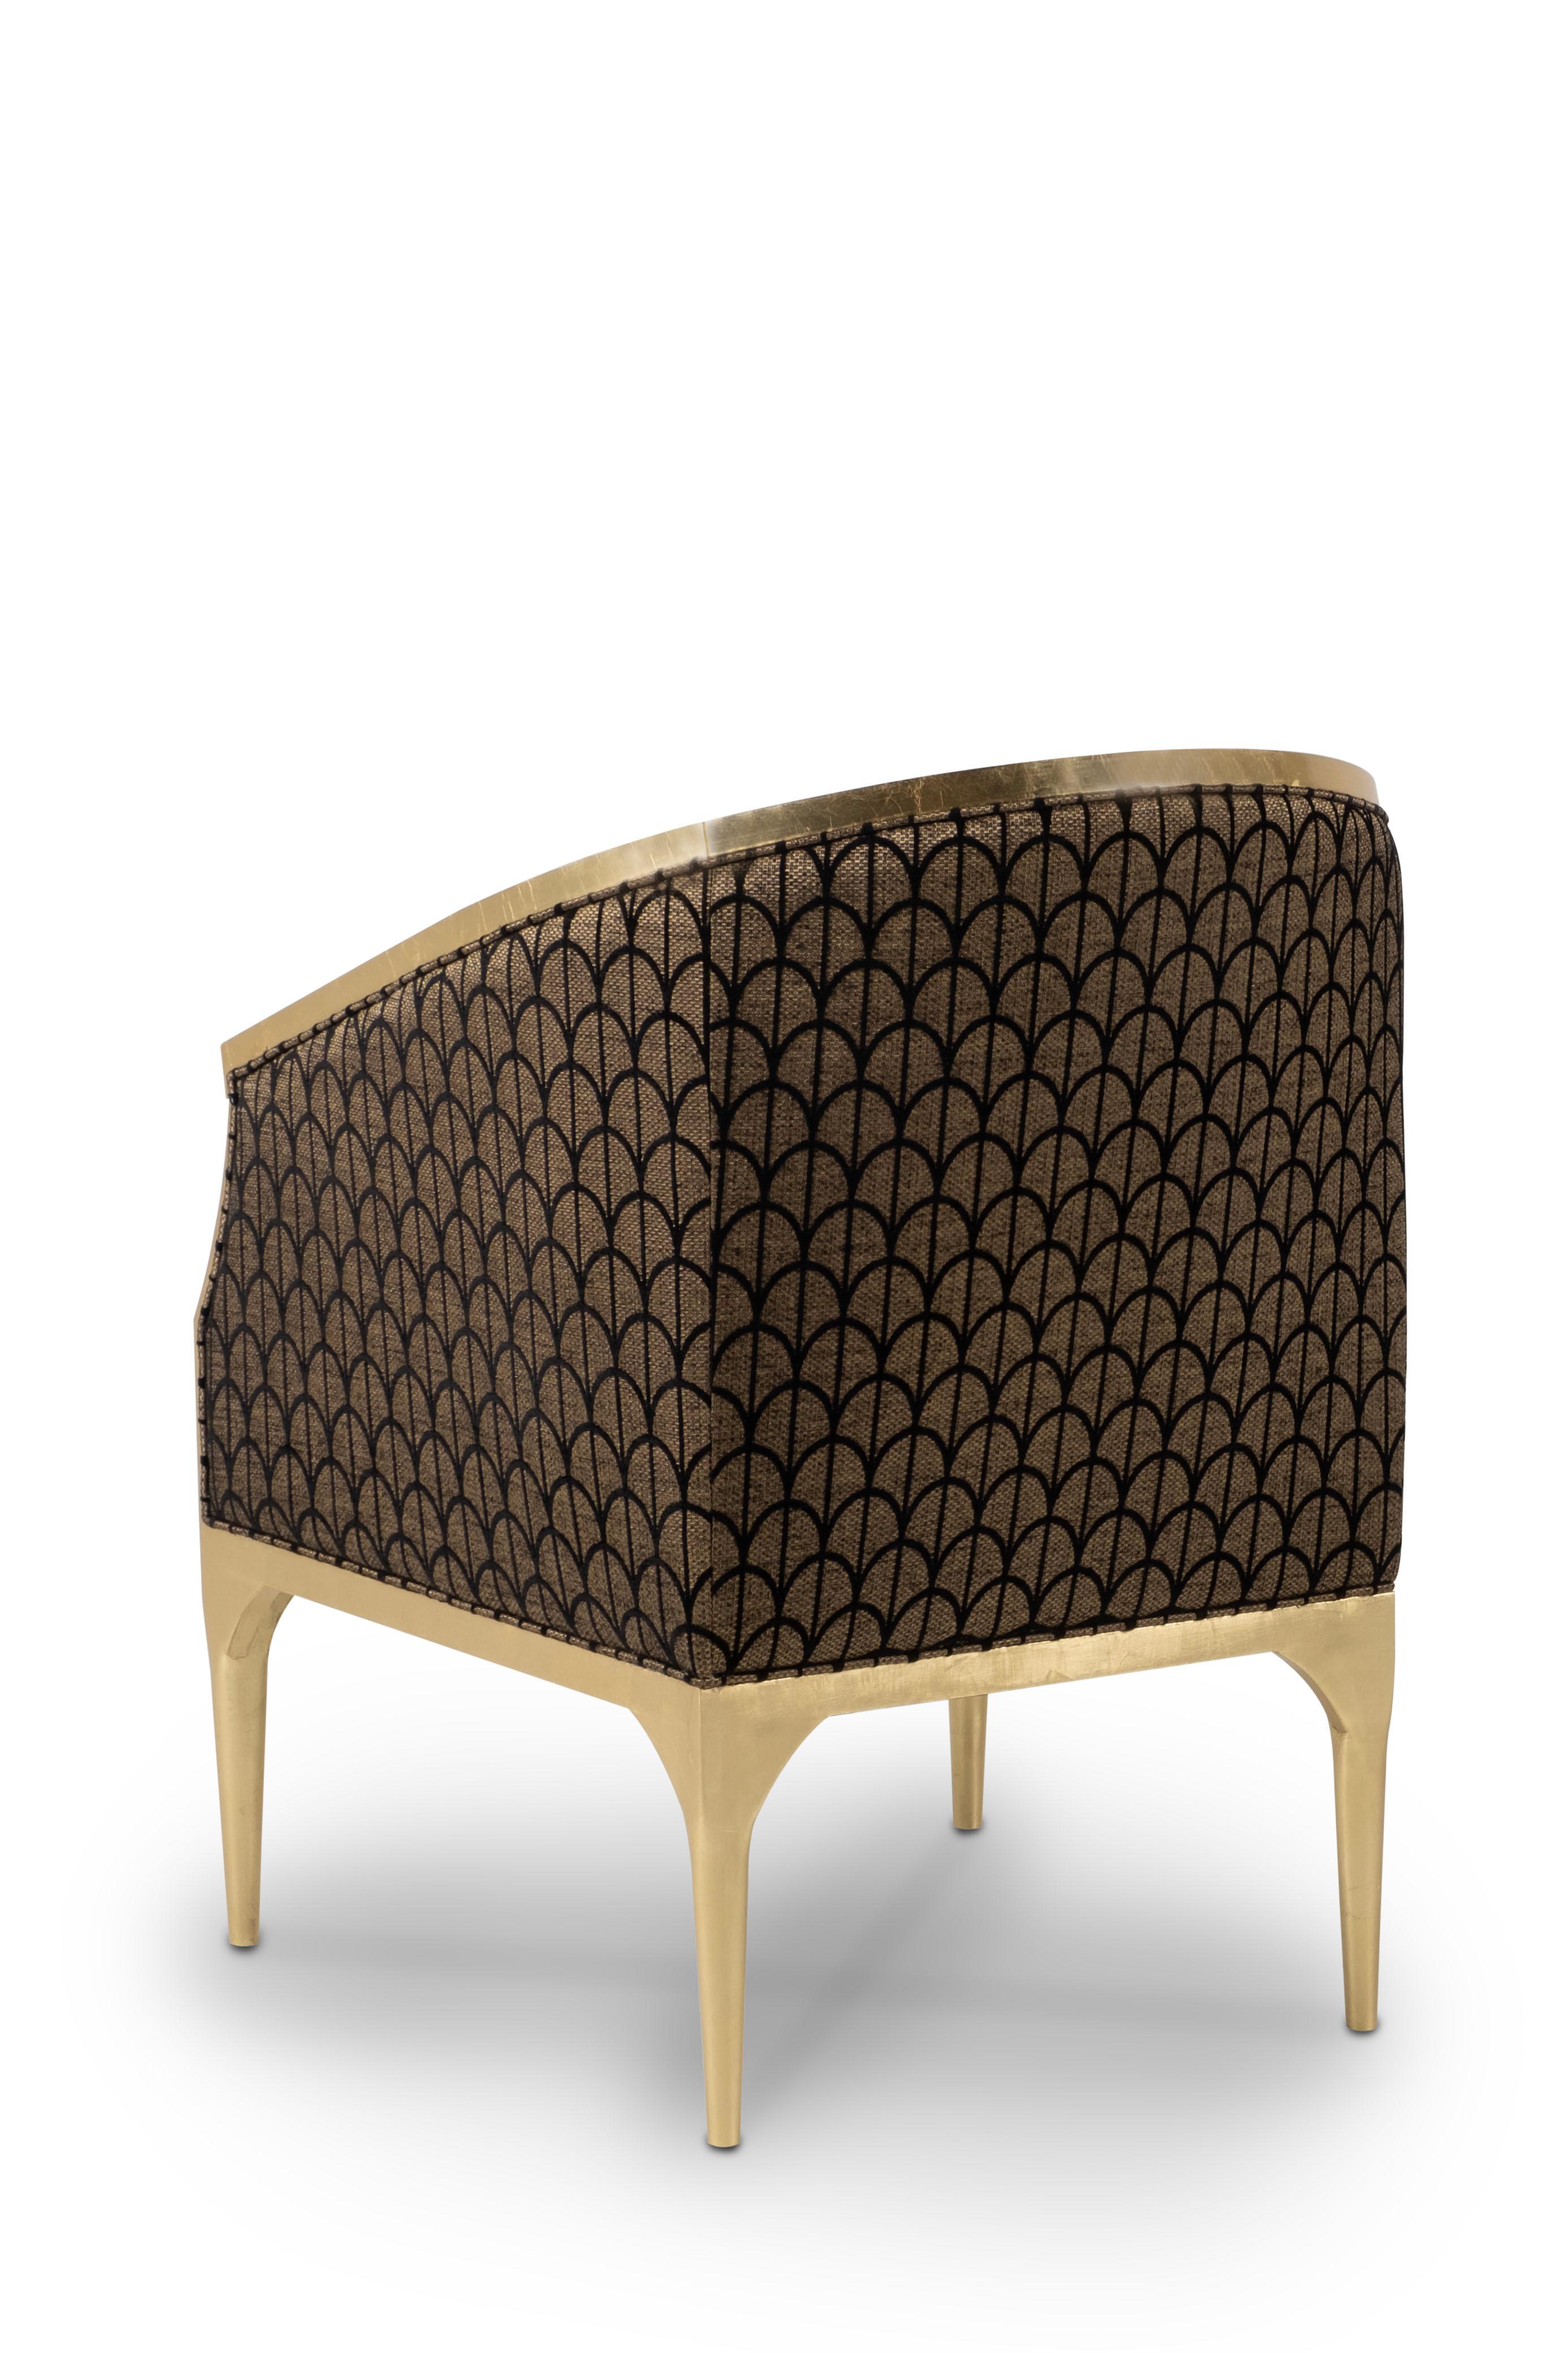 Paris armchair, Modern collection, handcrafted in Portugal - Europe by GF Modern.

The Paris armchair adds a sophisticated and elegant touch to any living area. Upholstered in Lelièvre gold chenille fabric and Dedar black jacquard fabric, it exudes